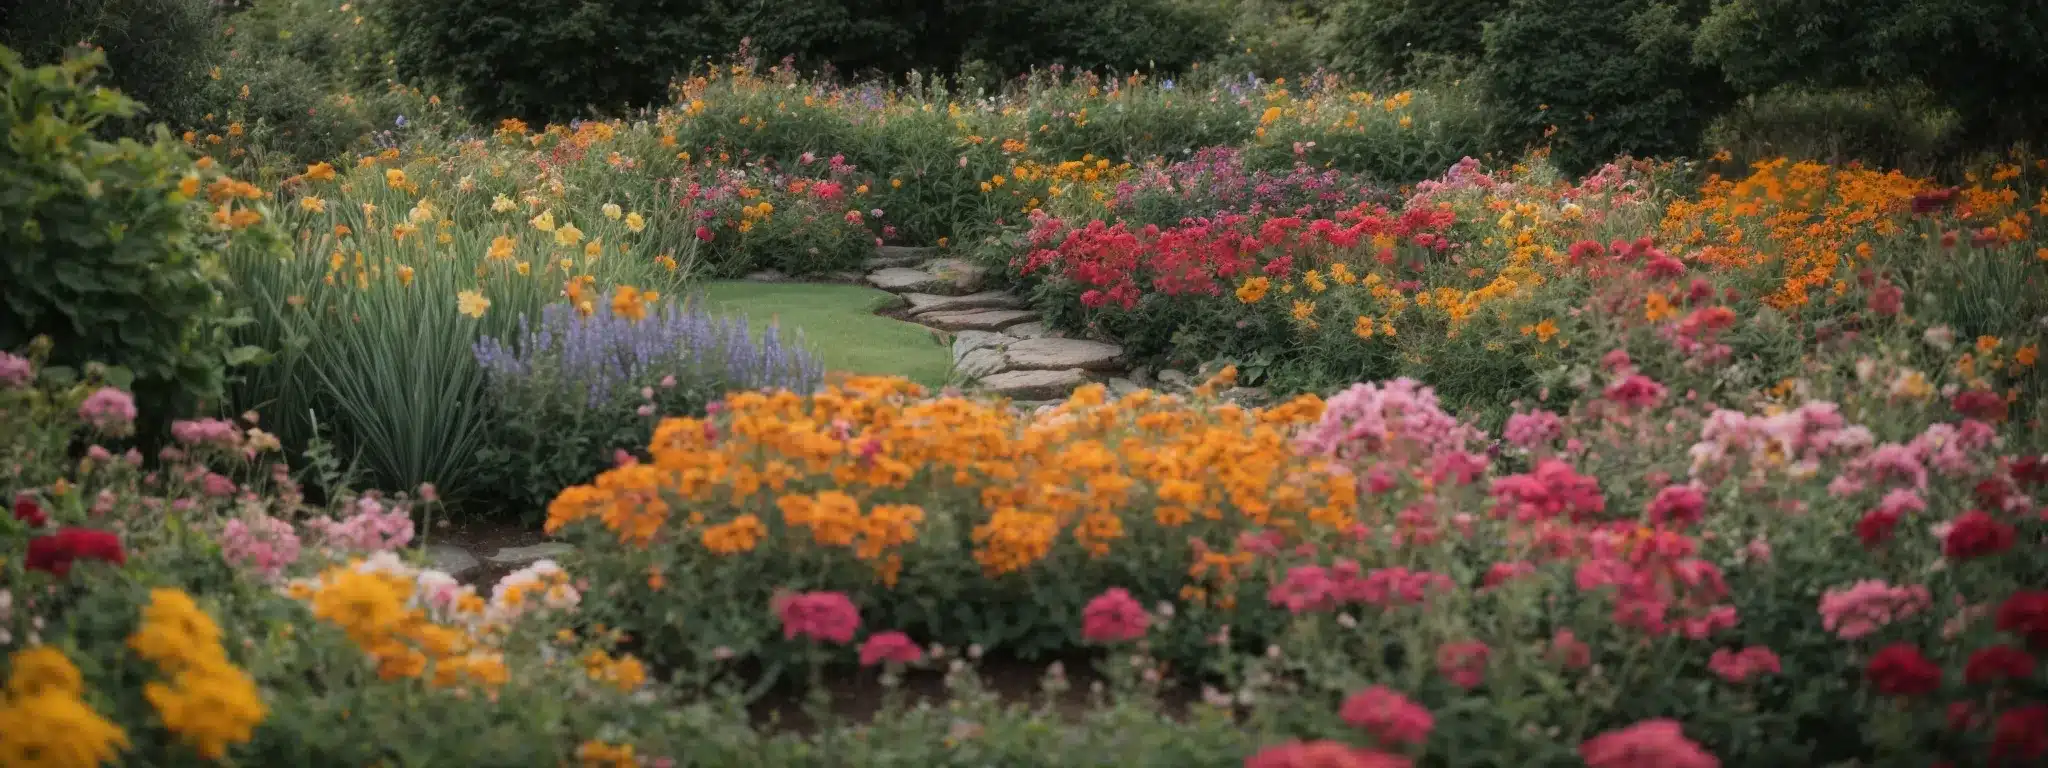 A Picturesque Garden With Vibrant, Diverse Flowers Neatly Arranged In Rich Soil.